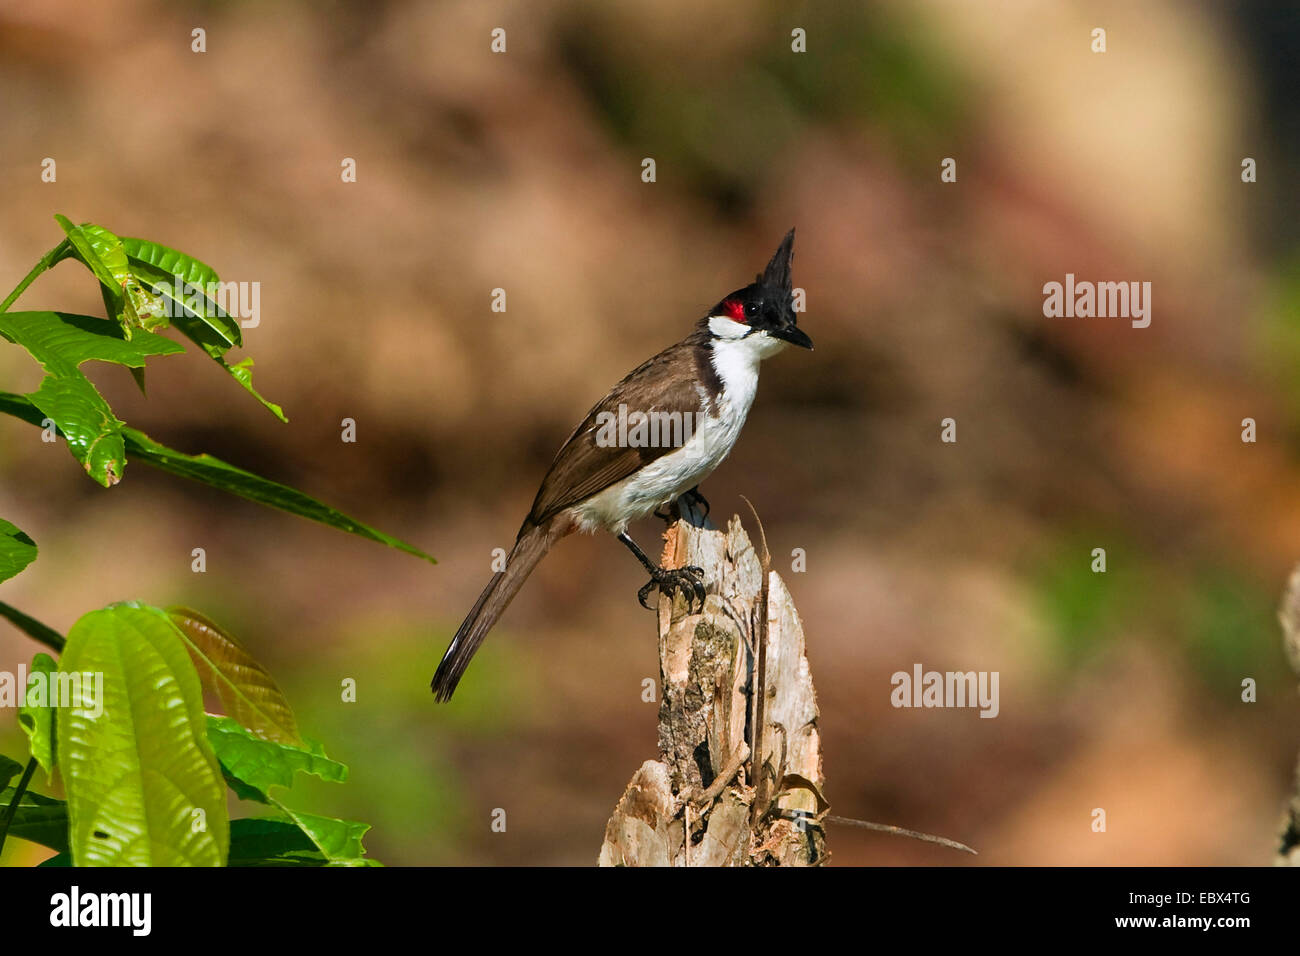 Red-whiskered bulbul (Pycnonotus jocosus), sitting on a branch, India, Andaman Islands Stock Photo